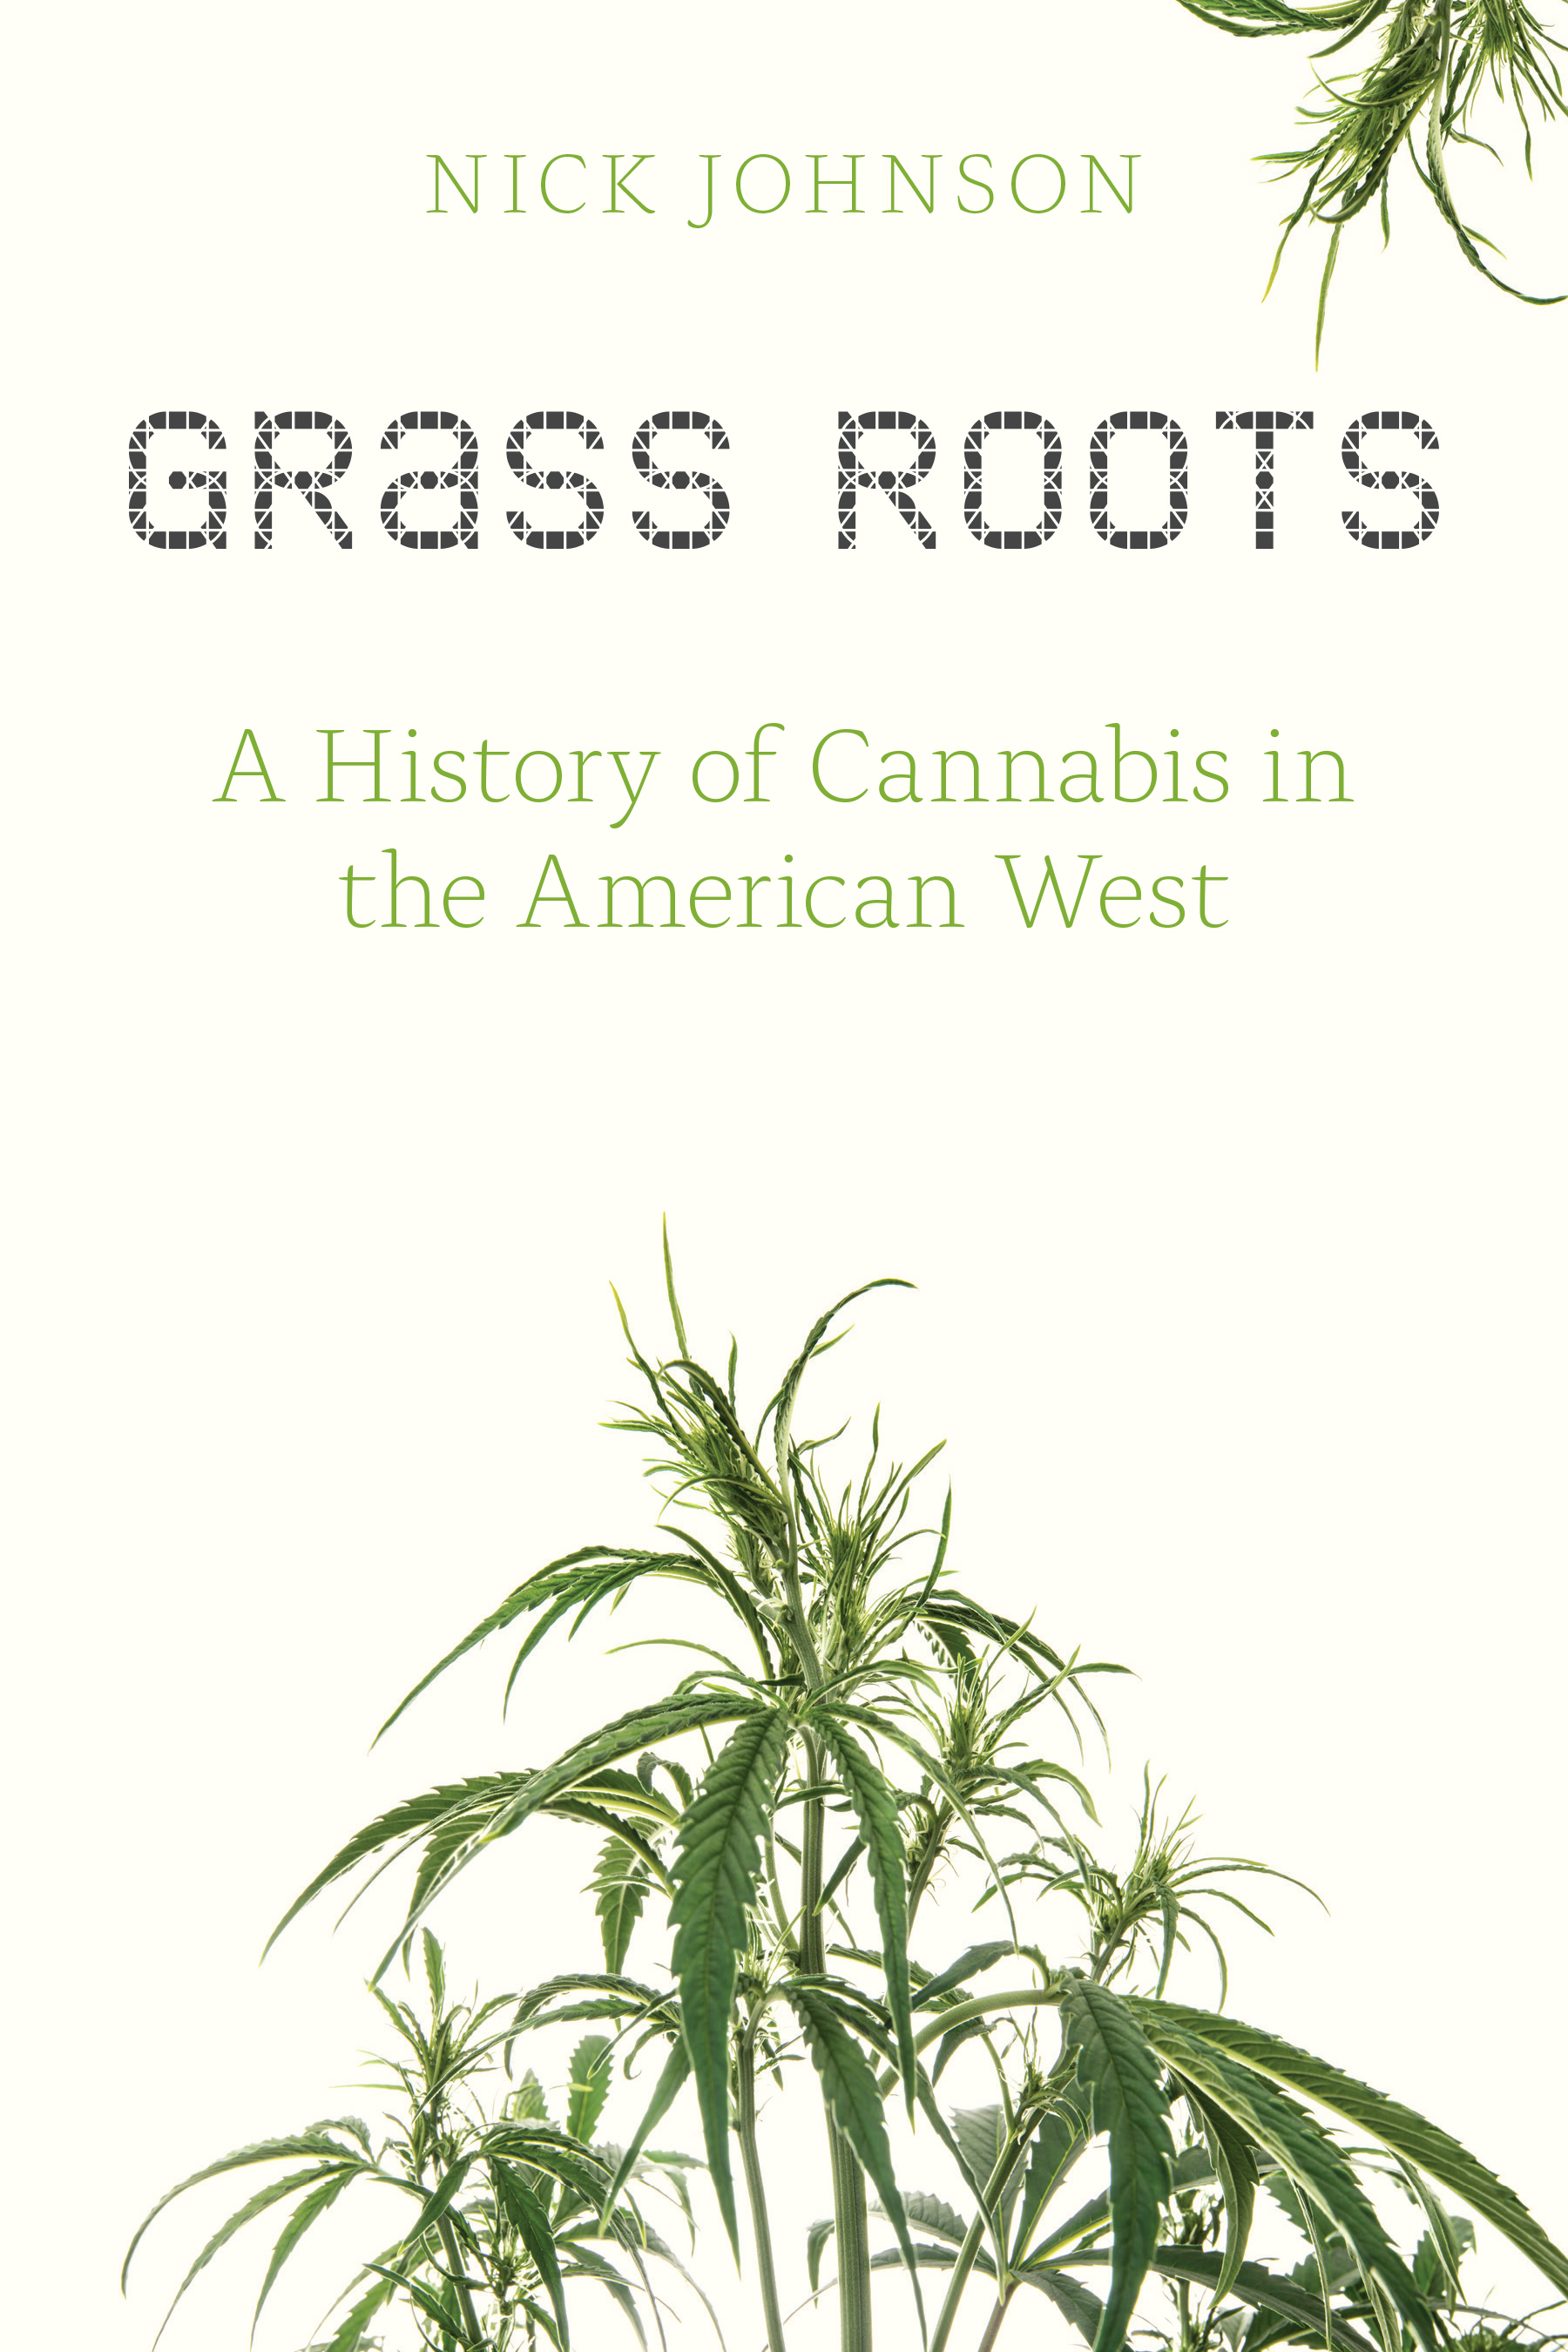 Cover of "Grass Roots: A History of Cannabis in the American West" by Nick Johnson